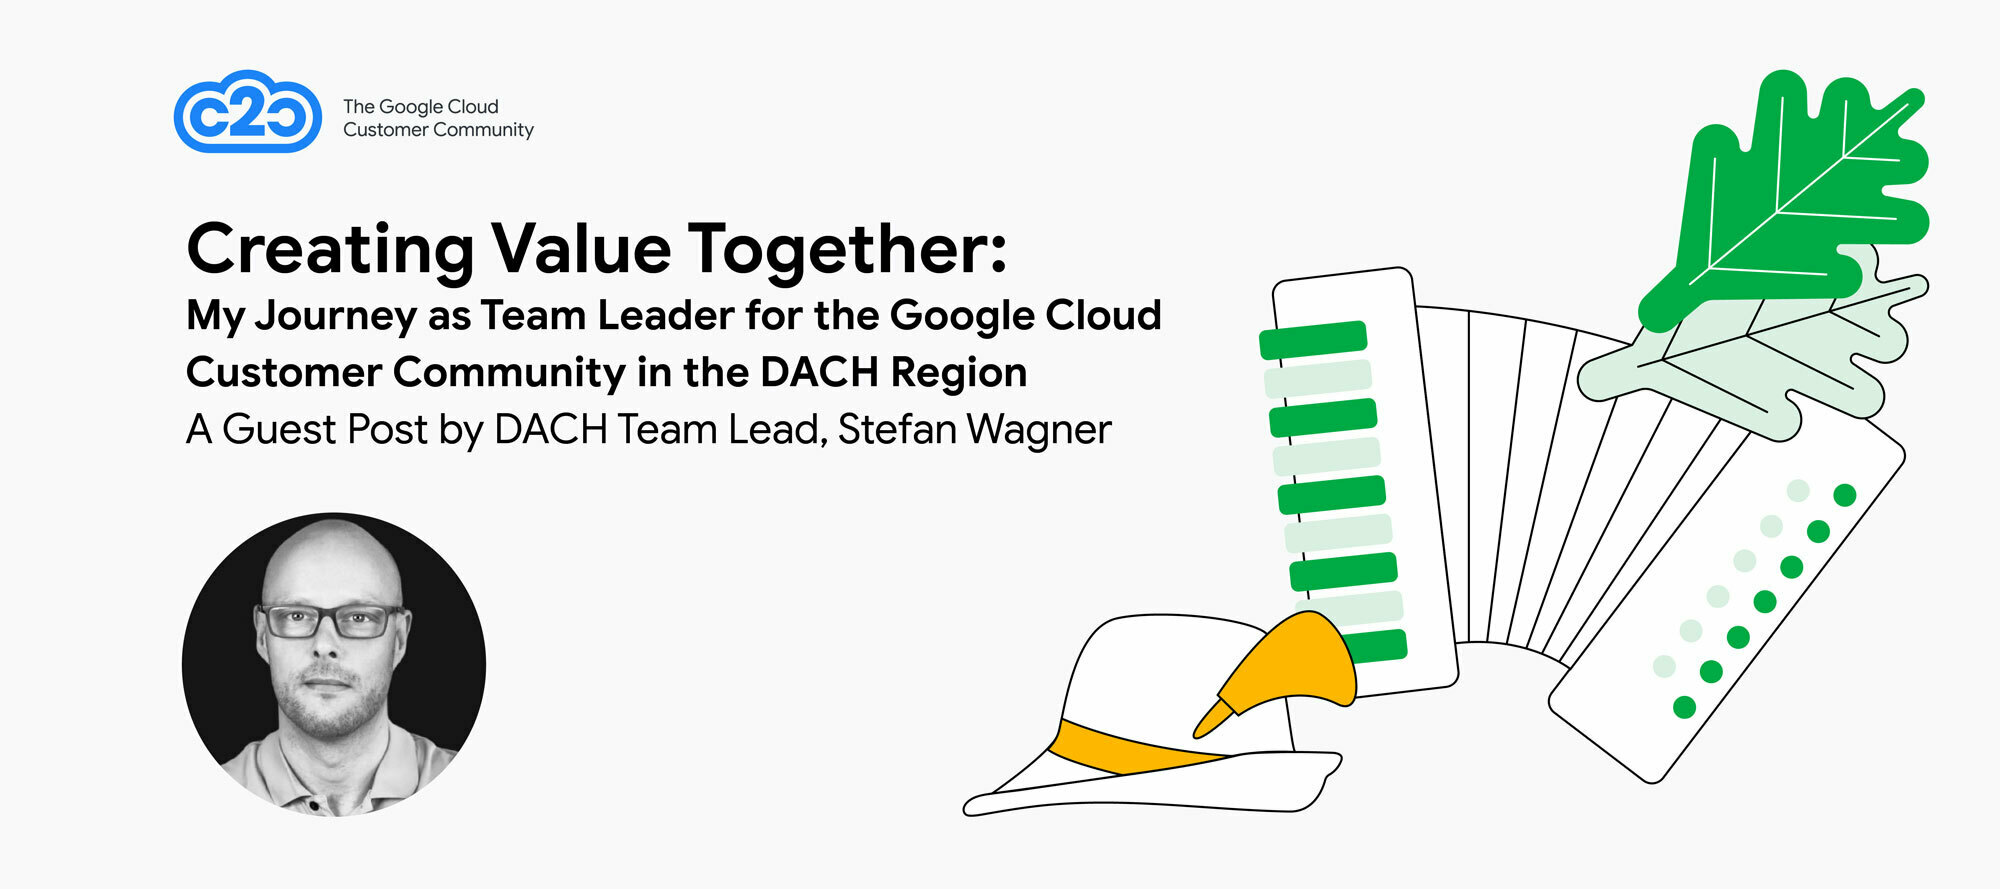 Creating Value Together: My Journey as Team Leader for the Google Cloud Customer Community in the DACH Region